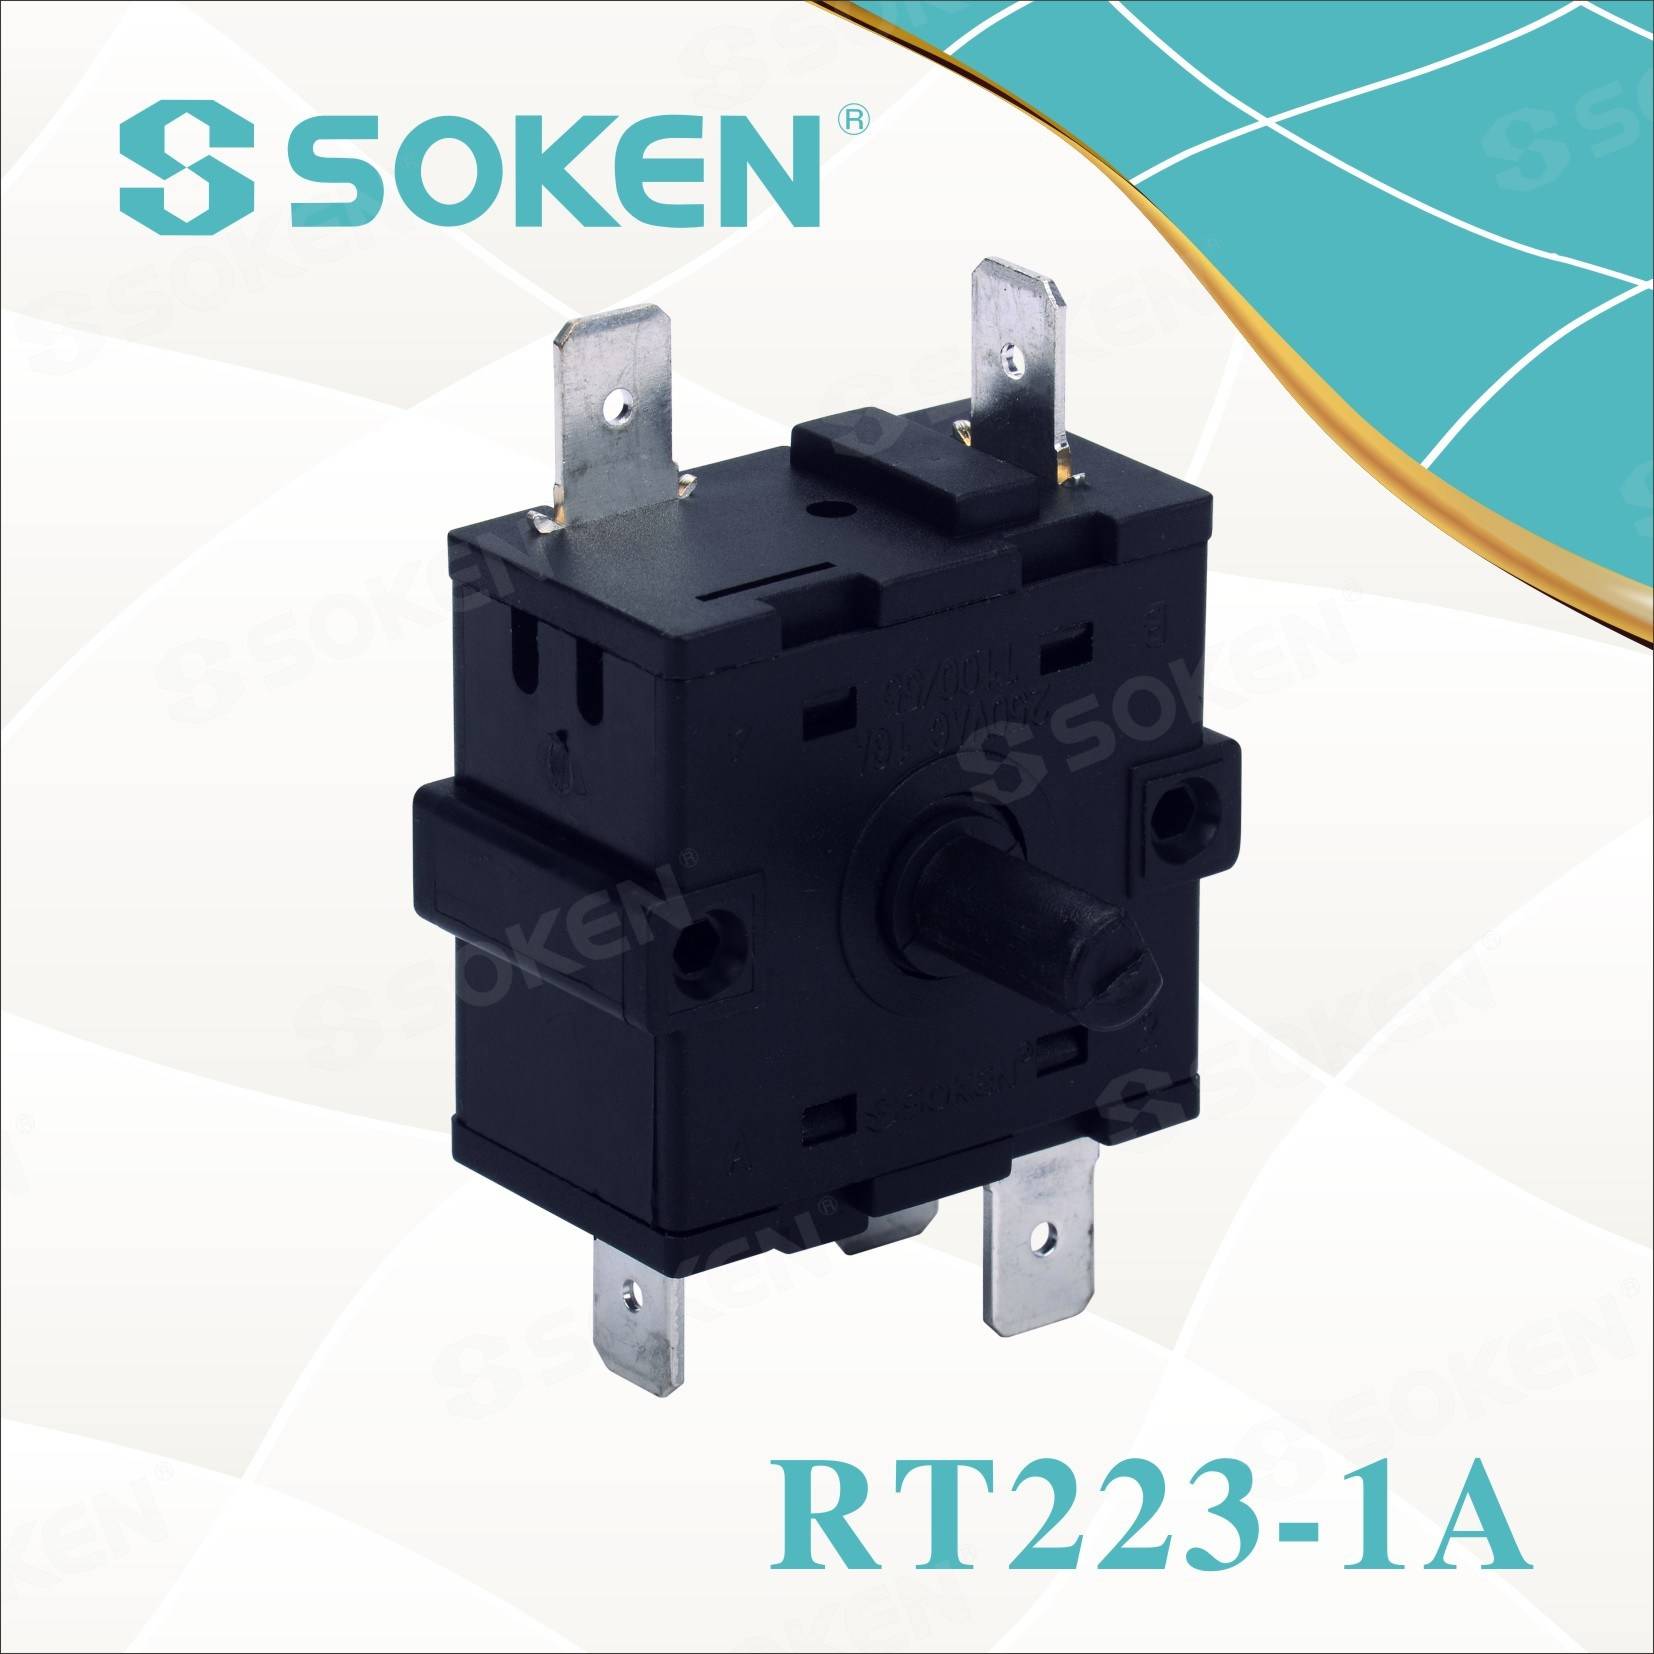 Factory made hot-sale 2a Rocker Switch 250v -
 Soken 4 Position Rotary Switch – Master Soken Electrical